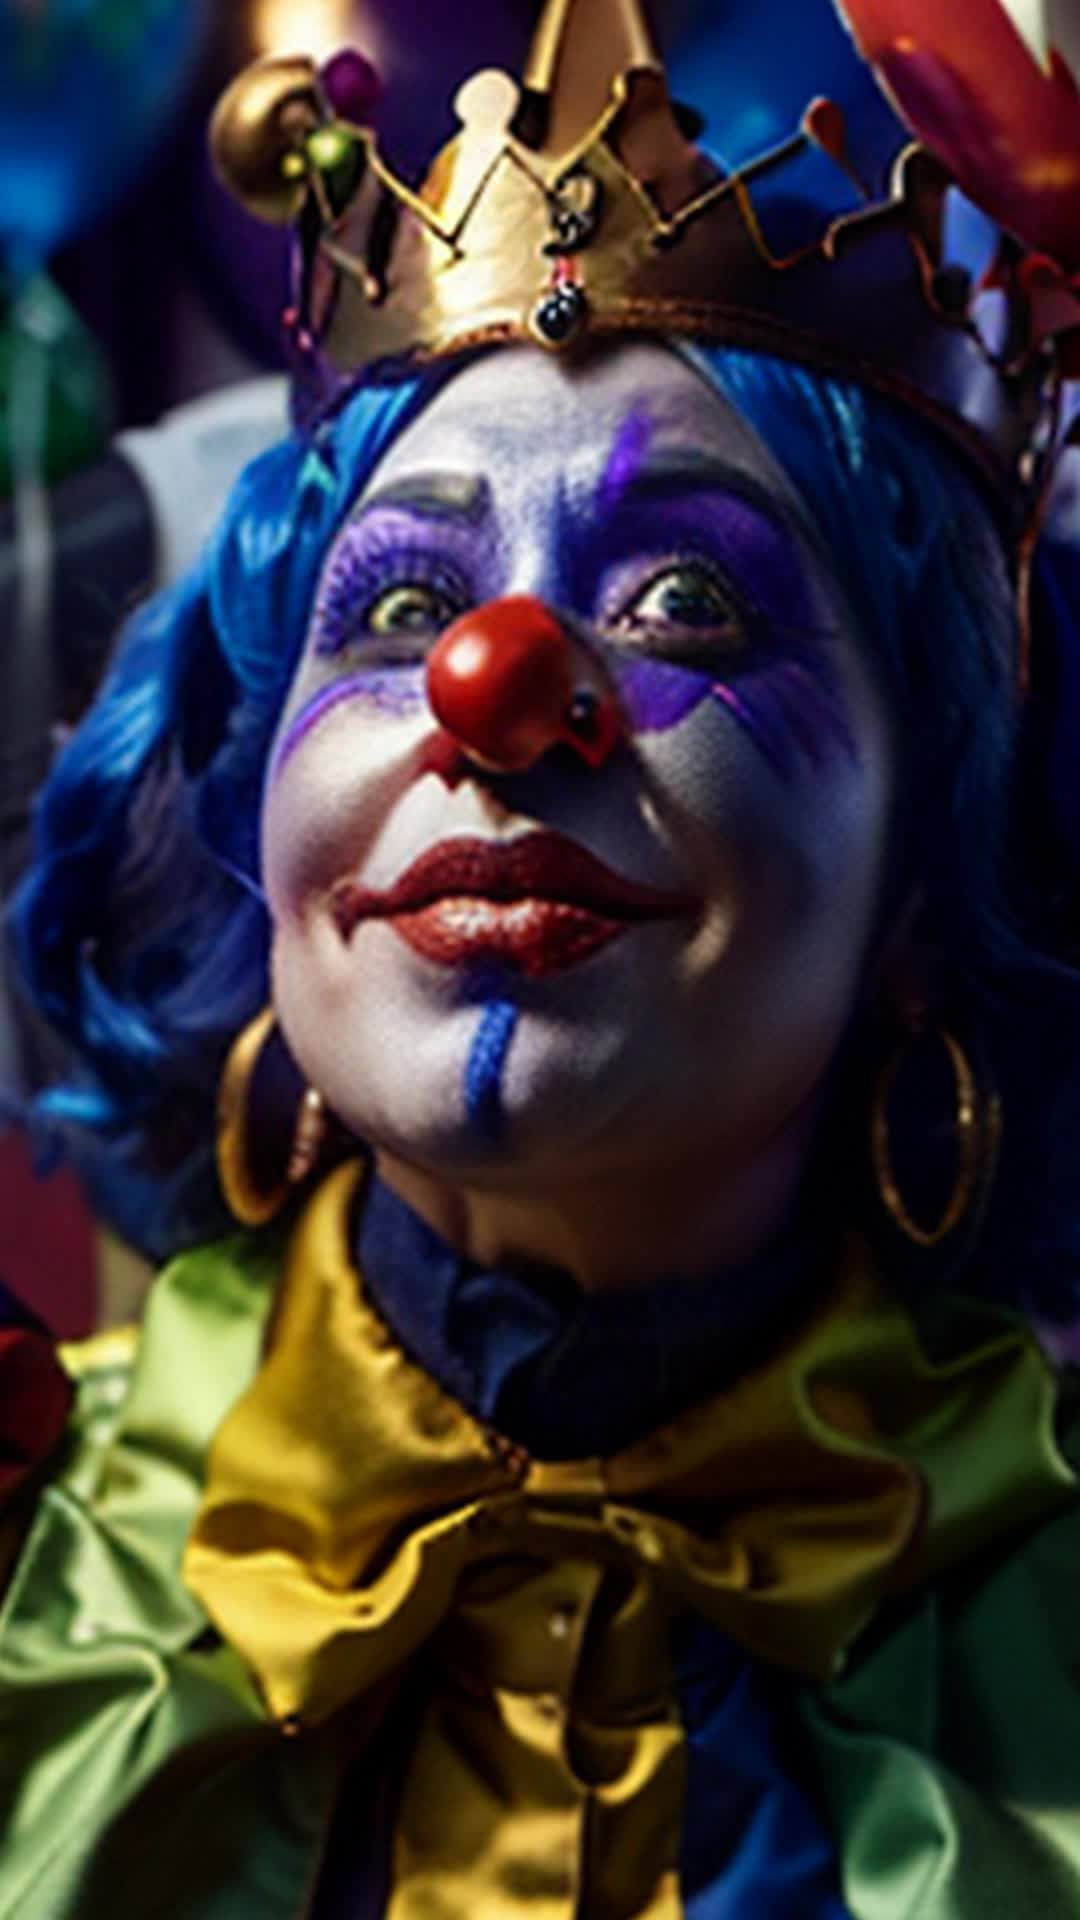 Jester clown crowned on makeshift throne under big top, accepting balloon scepter, crowned as queen of Hollywood, Humorous, theatrical expressions, soft glow illuminating scene, close-up shot